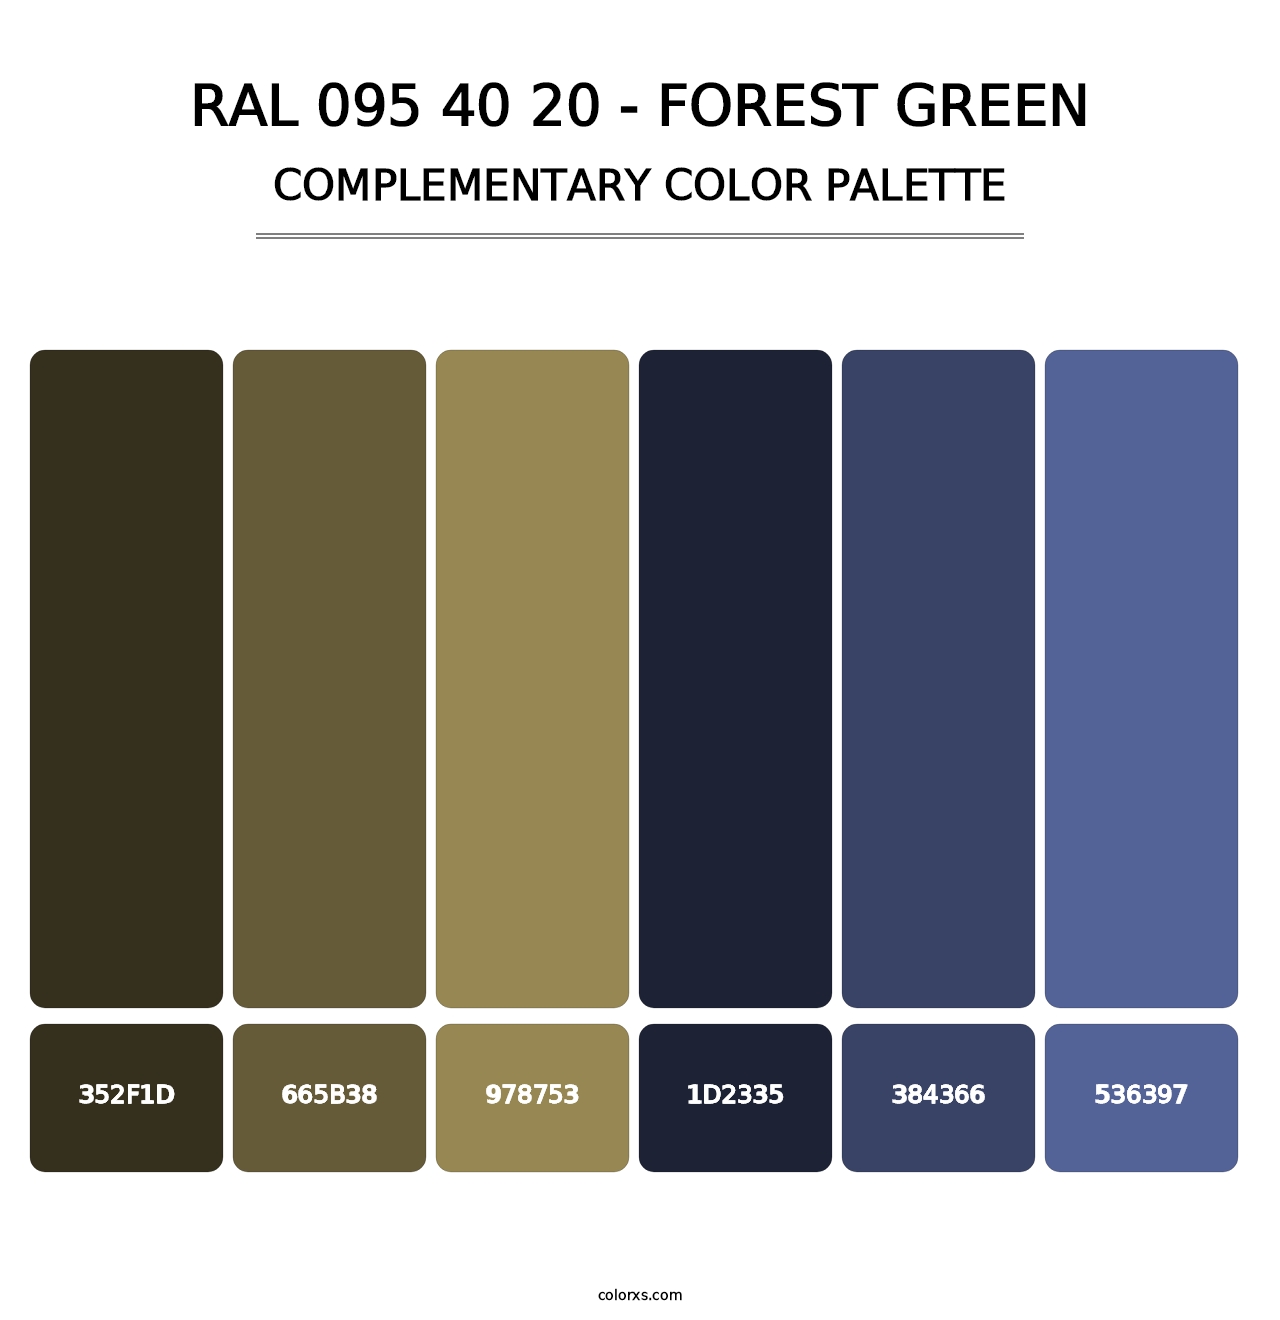 RAL 095 40 20 - Forest Green - Complementary Color Palette